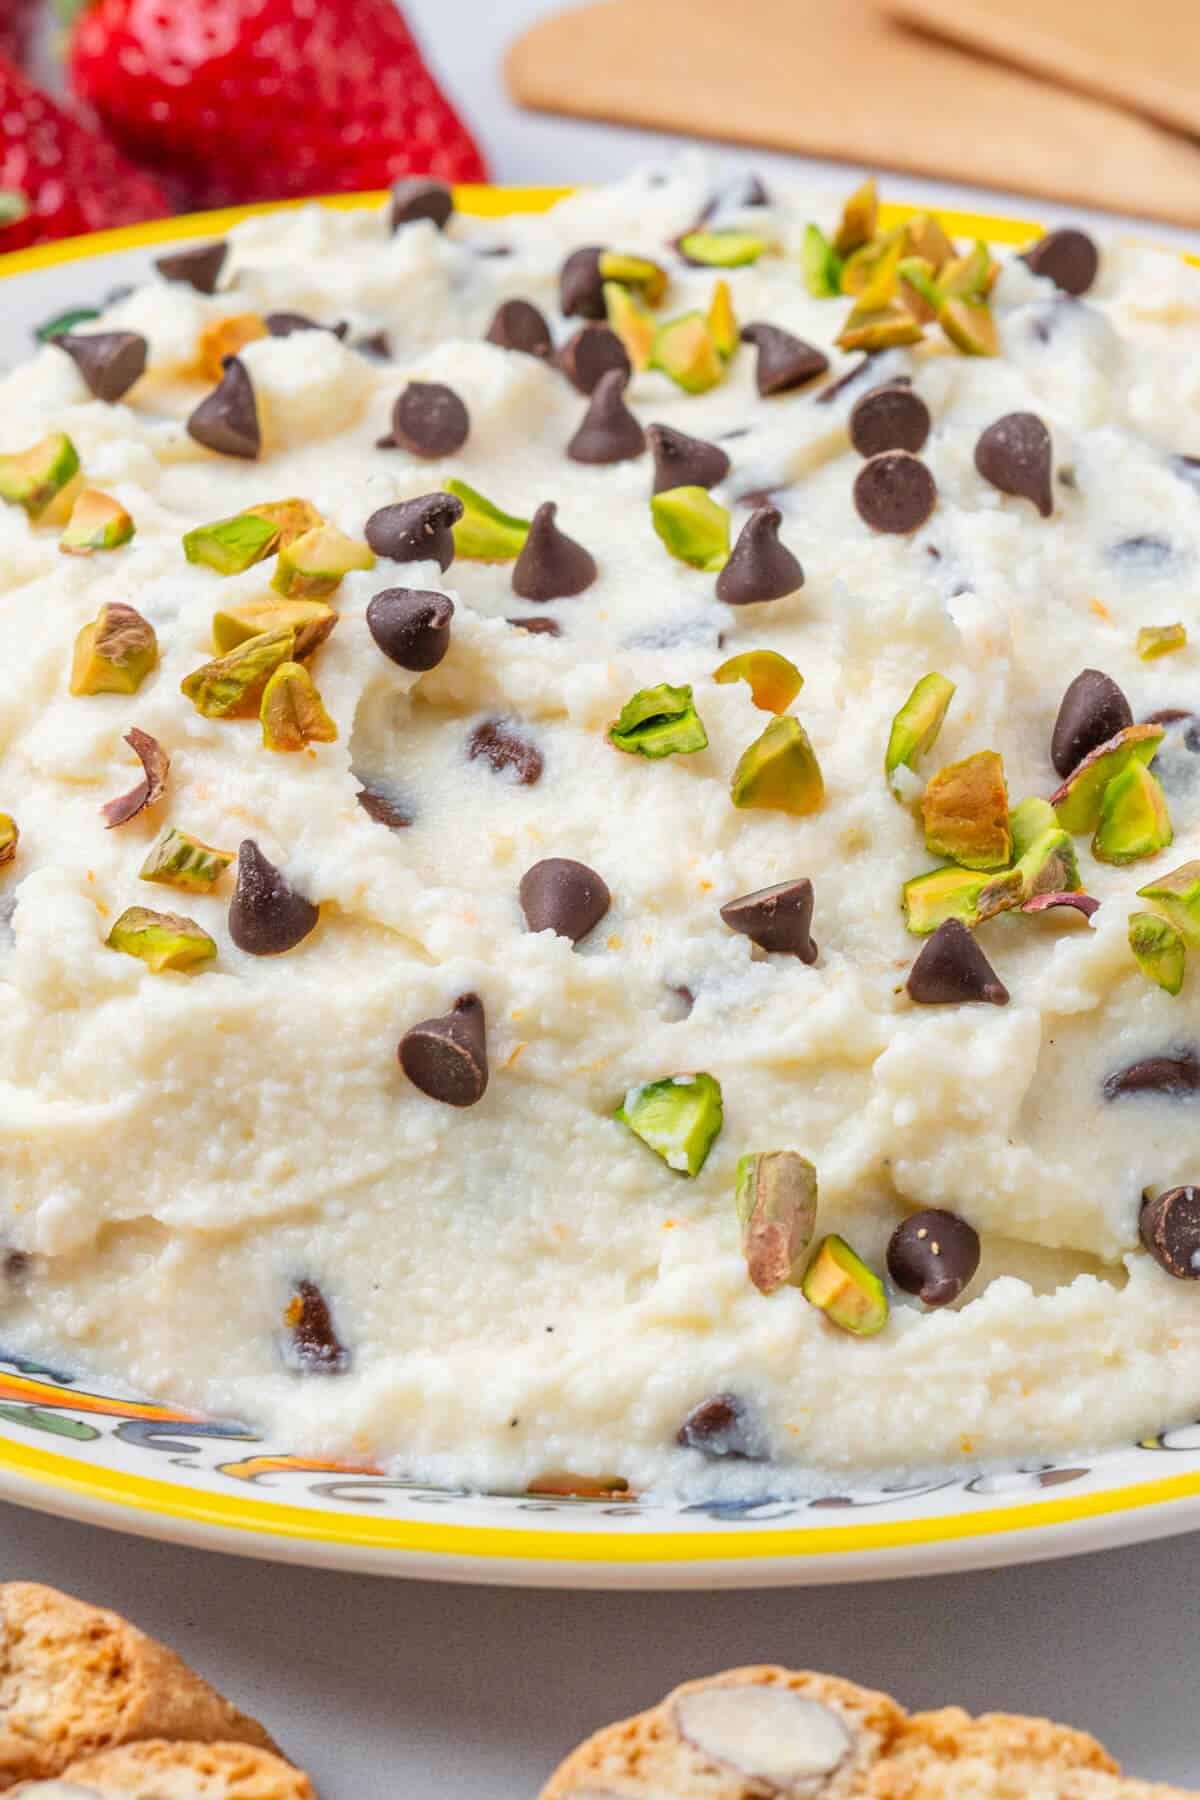 Plate of dip with pistachios and choc chips